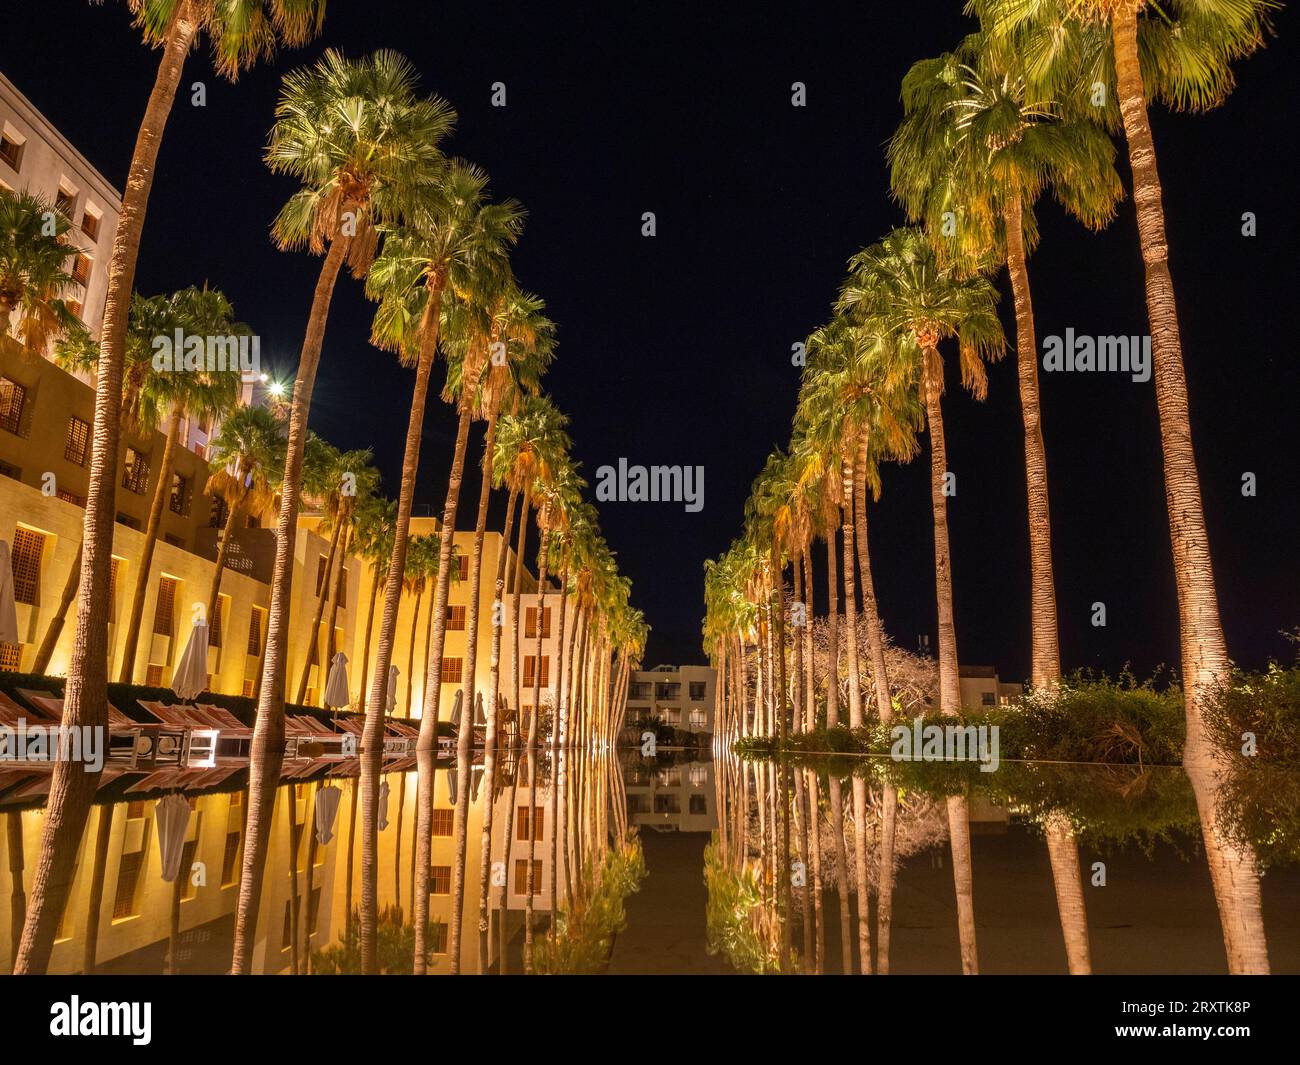 Night at the Kempinski Hotel Ishtar, a five-star luxury resort by the Dead Sea inspired by the Hanging Gardens of Babylon, Jordan, Middle East Stock Photo